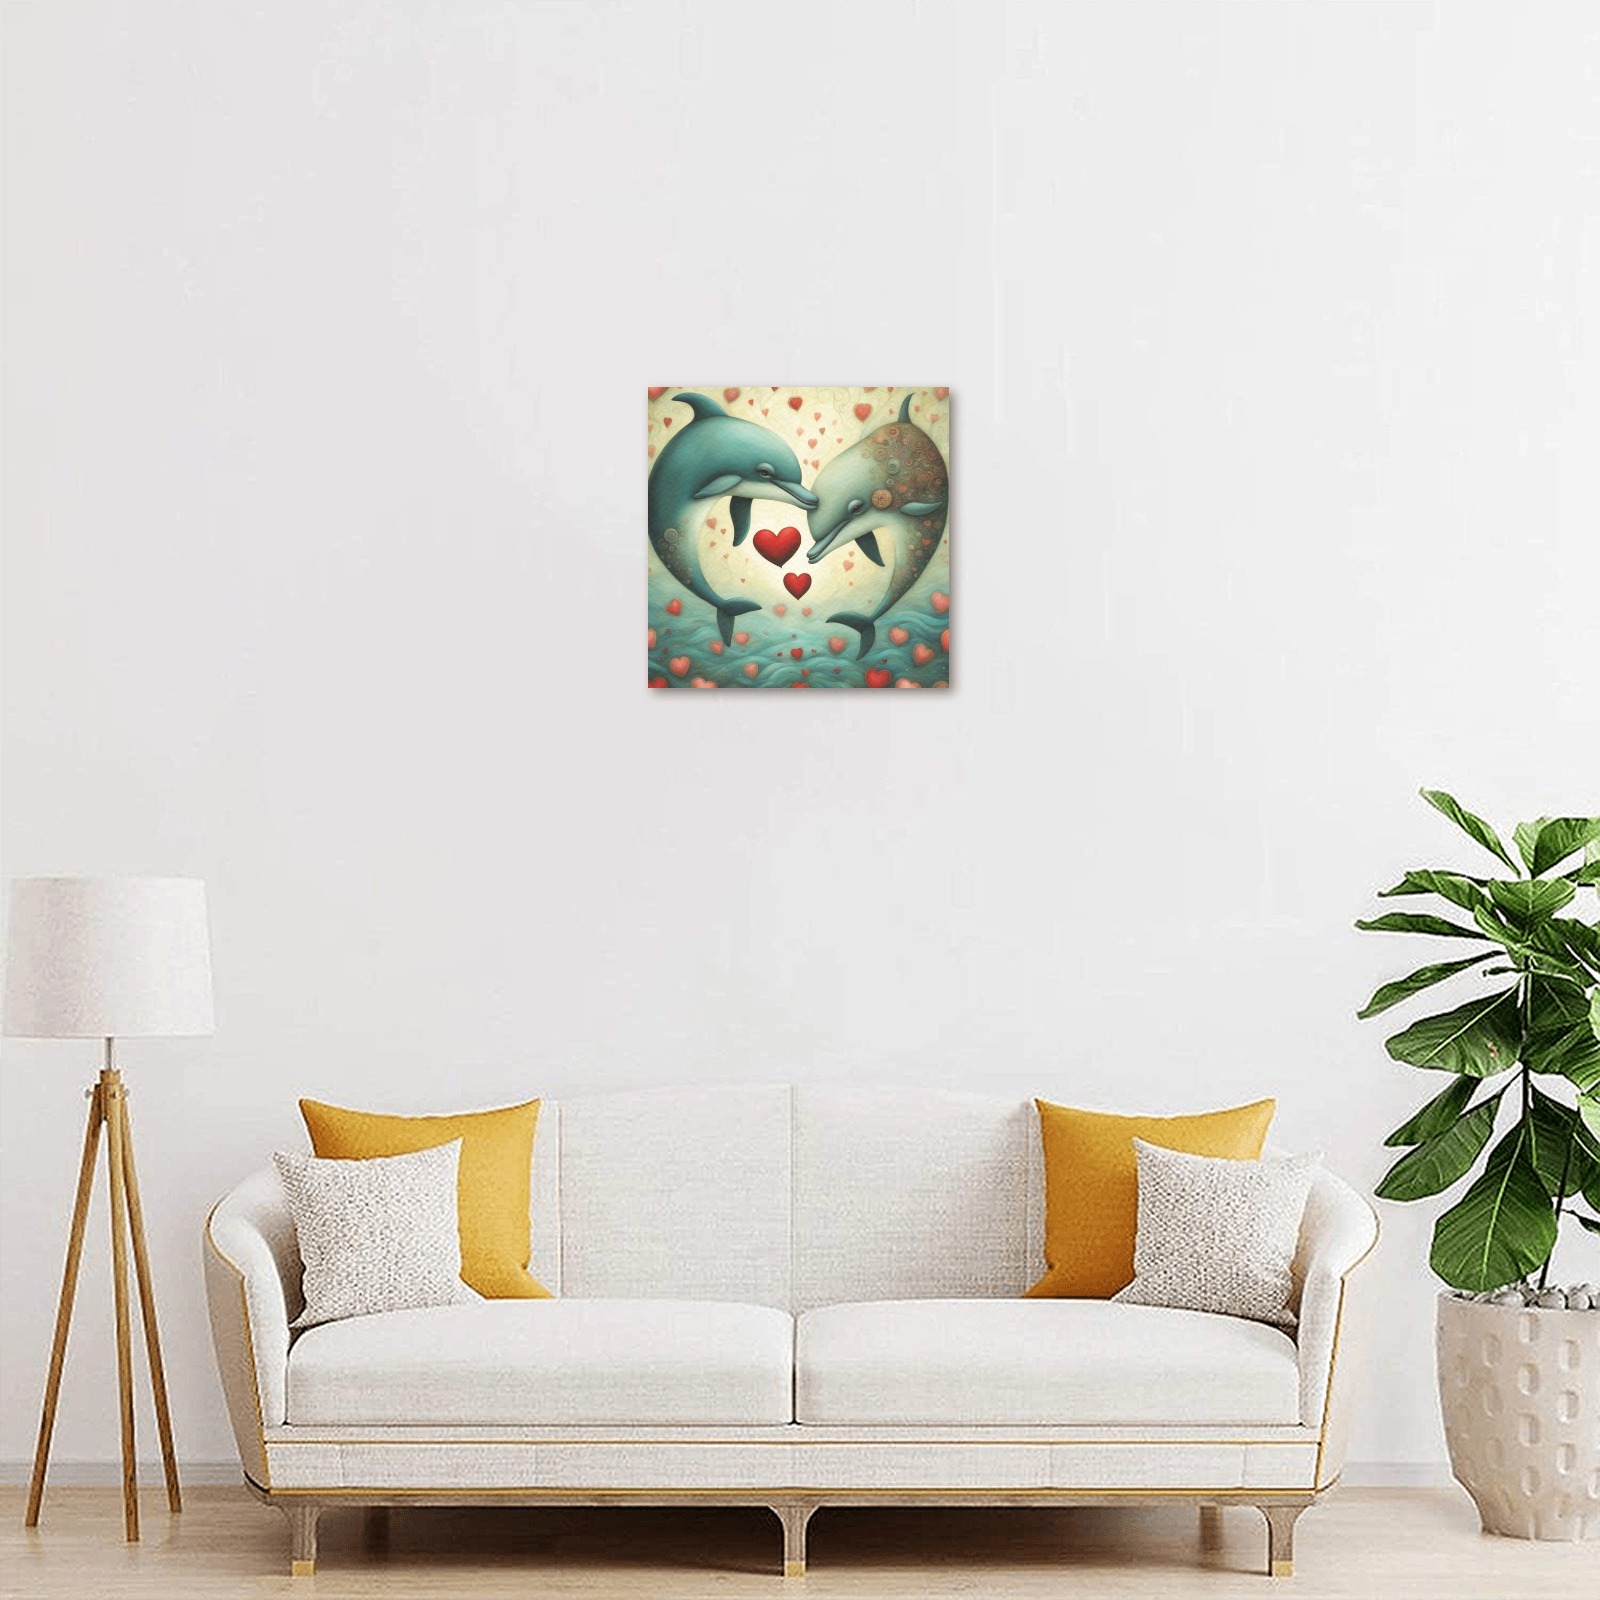 Dolphin Love 2 Upgraded Canvas Print 12"x12"